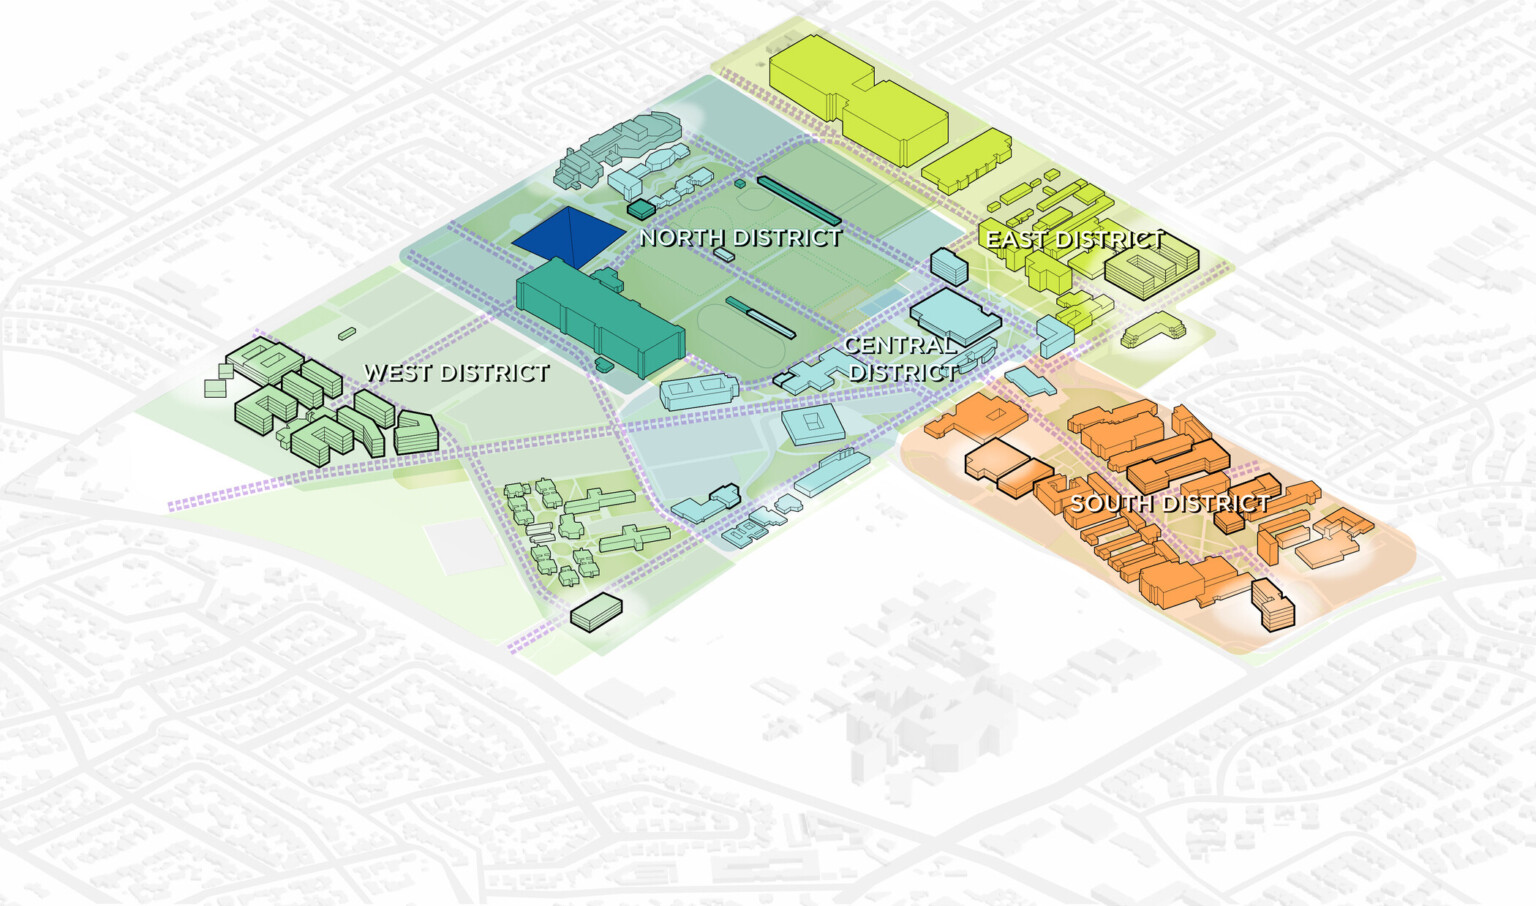 California State University Long Beach, animated aerial map, green space, building models, future planning, campus vision plan, higher education, phased construction, wellness with a rectilinear campus section highlighted in green, orange, and blue